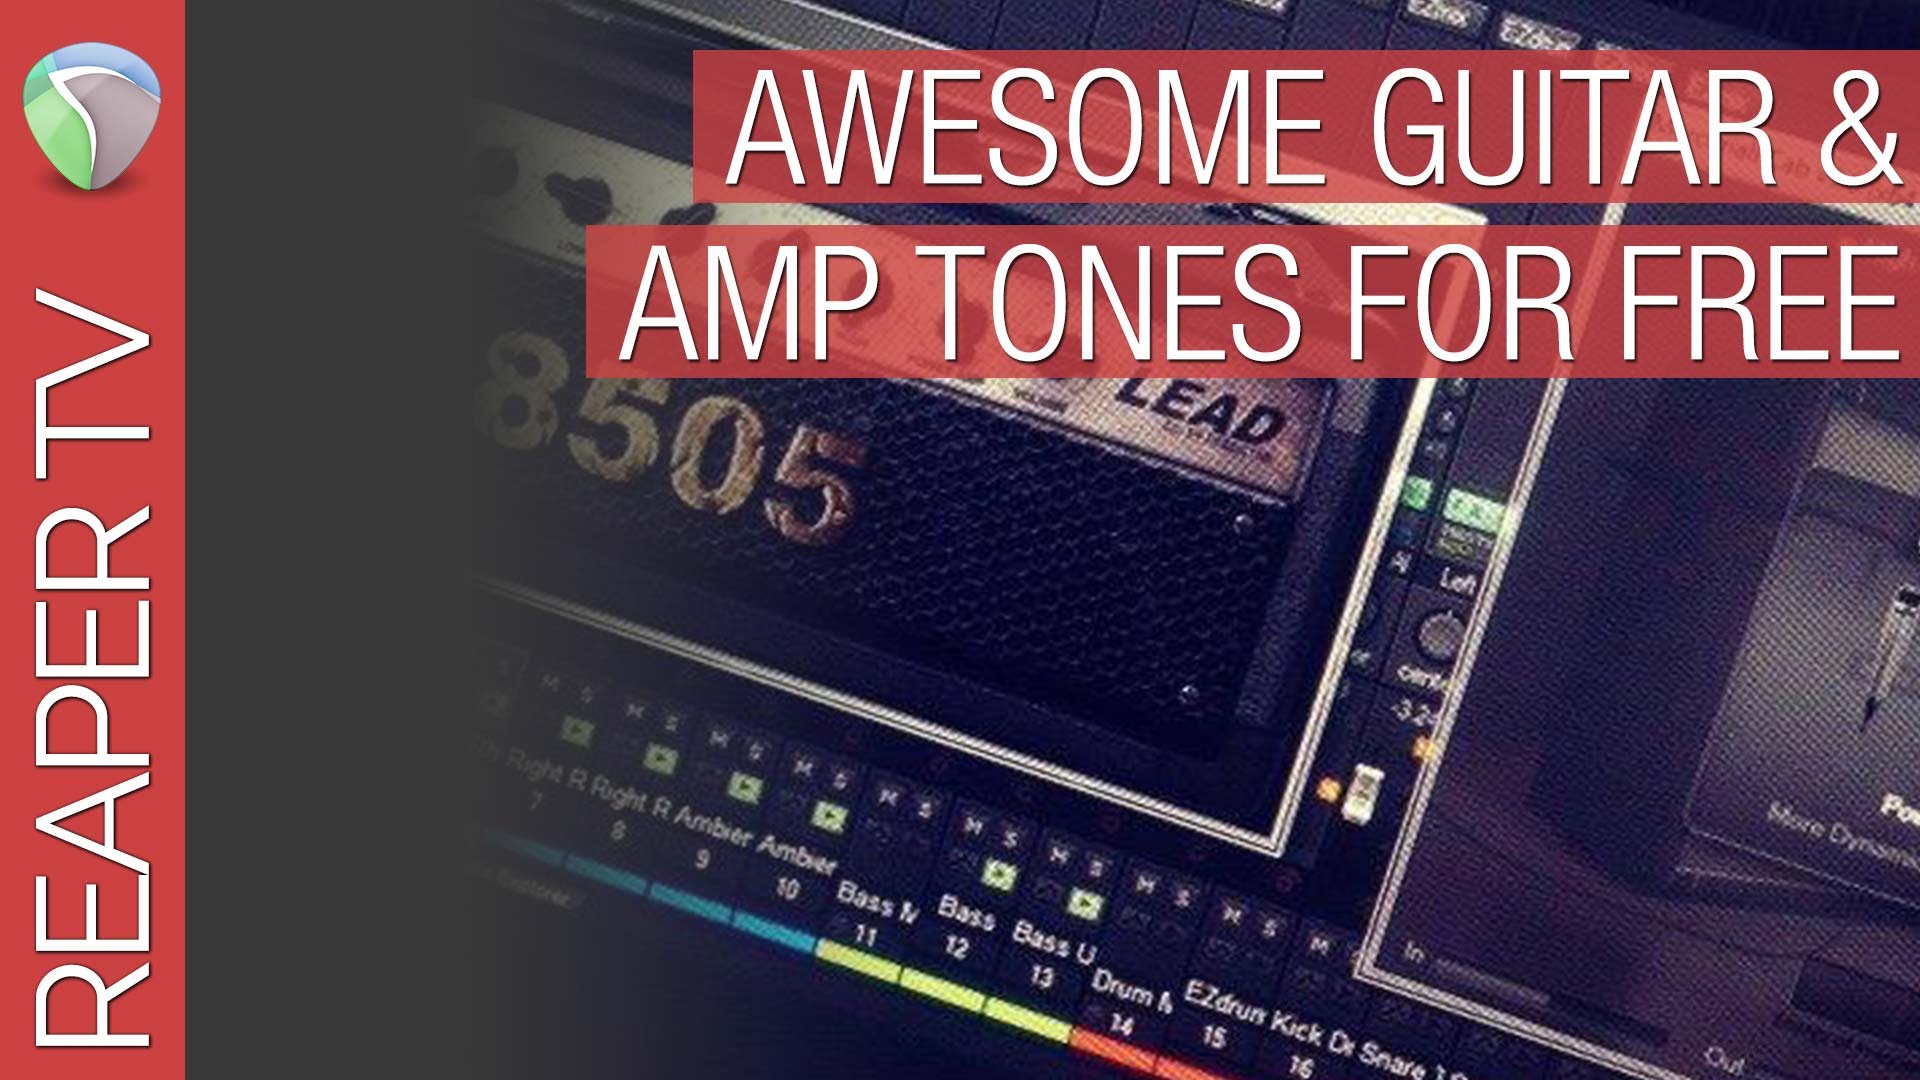 How to Get Awesome Guitar & Amp Tones for Free with Impulse Responses